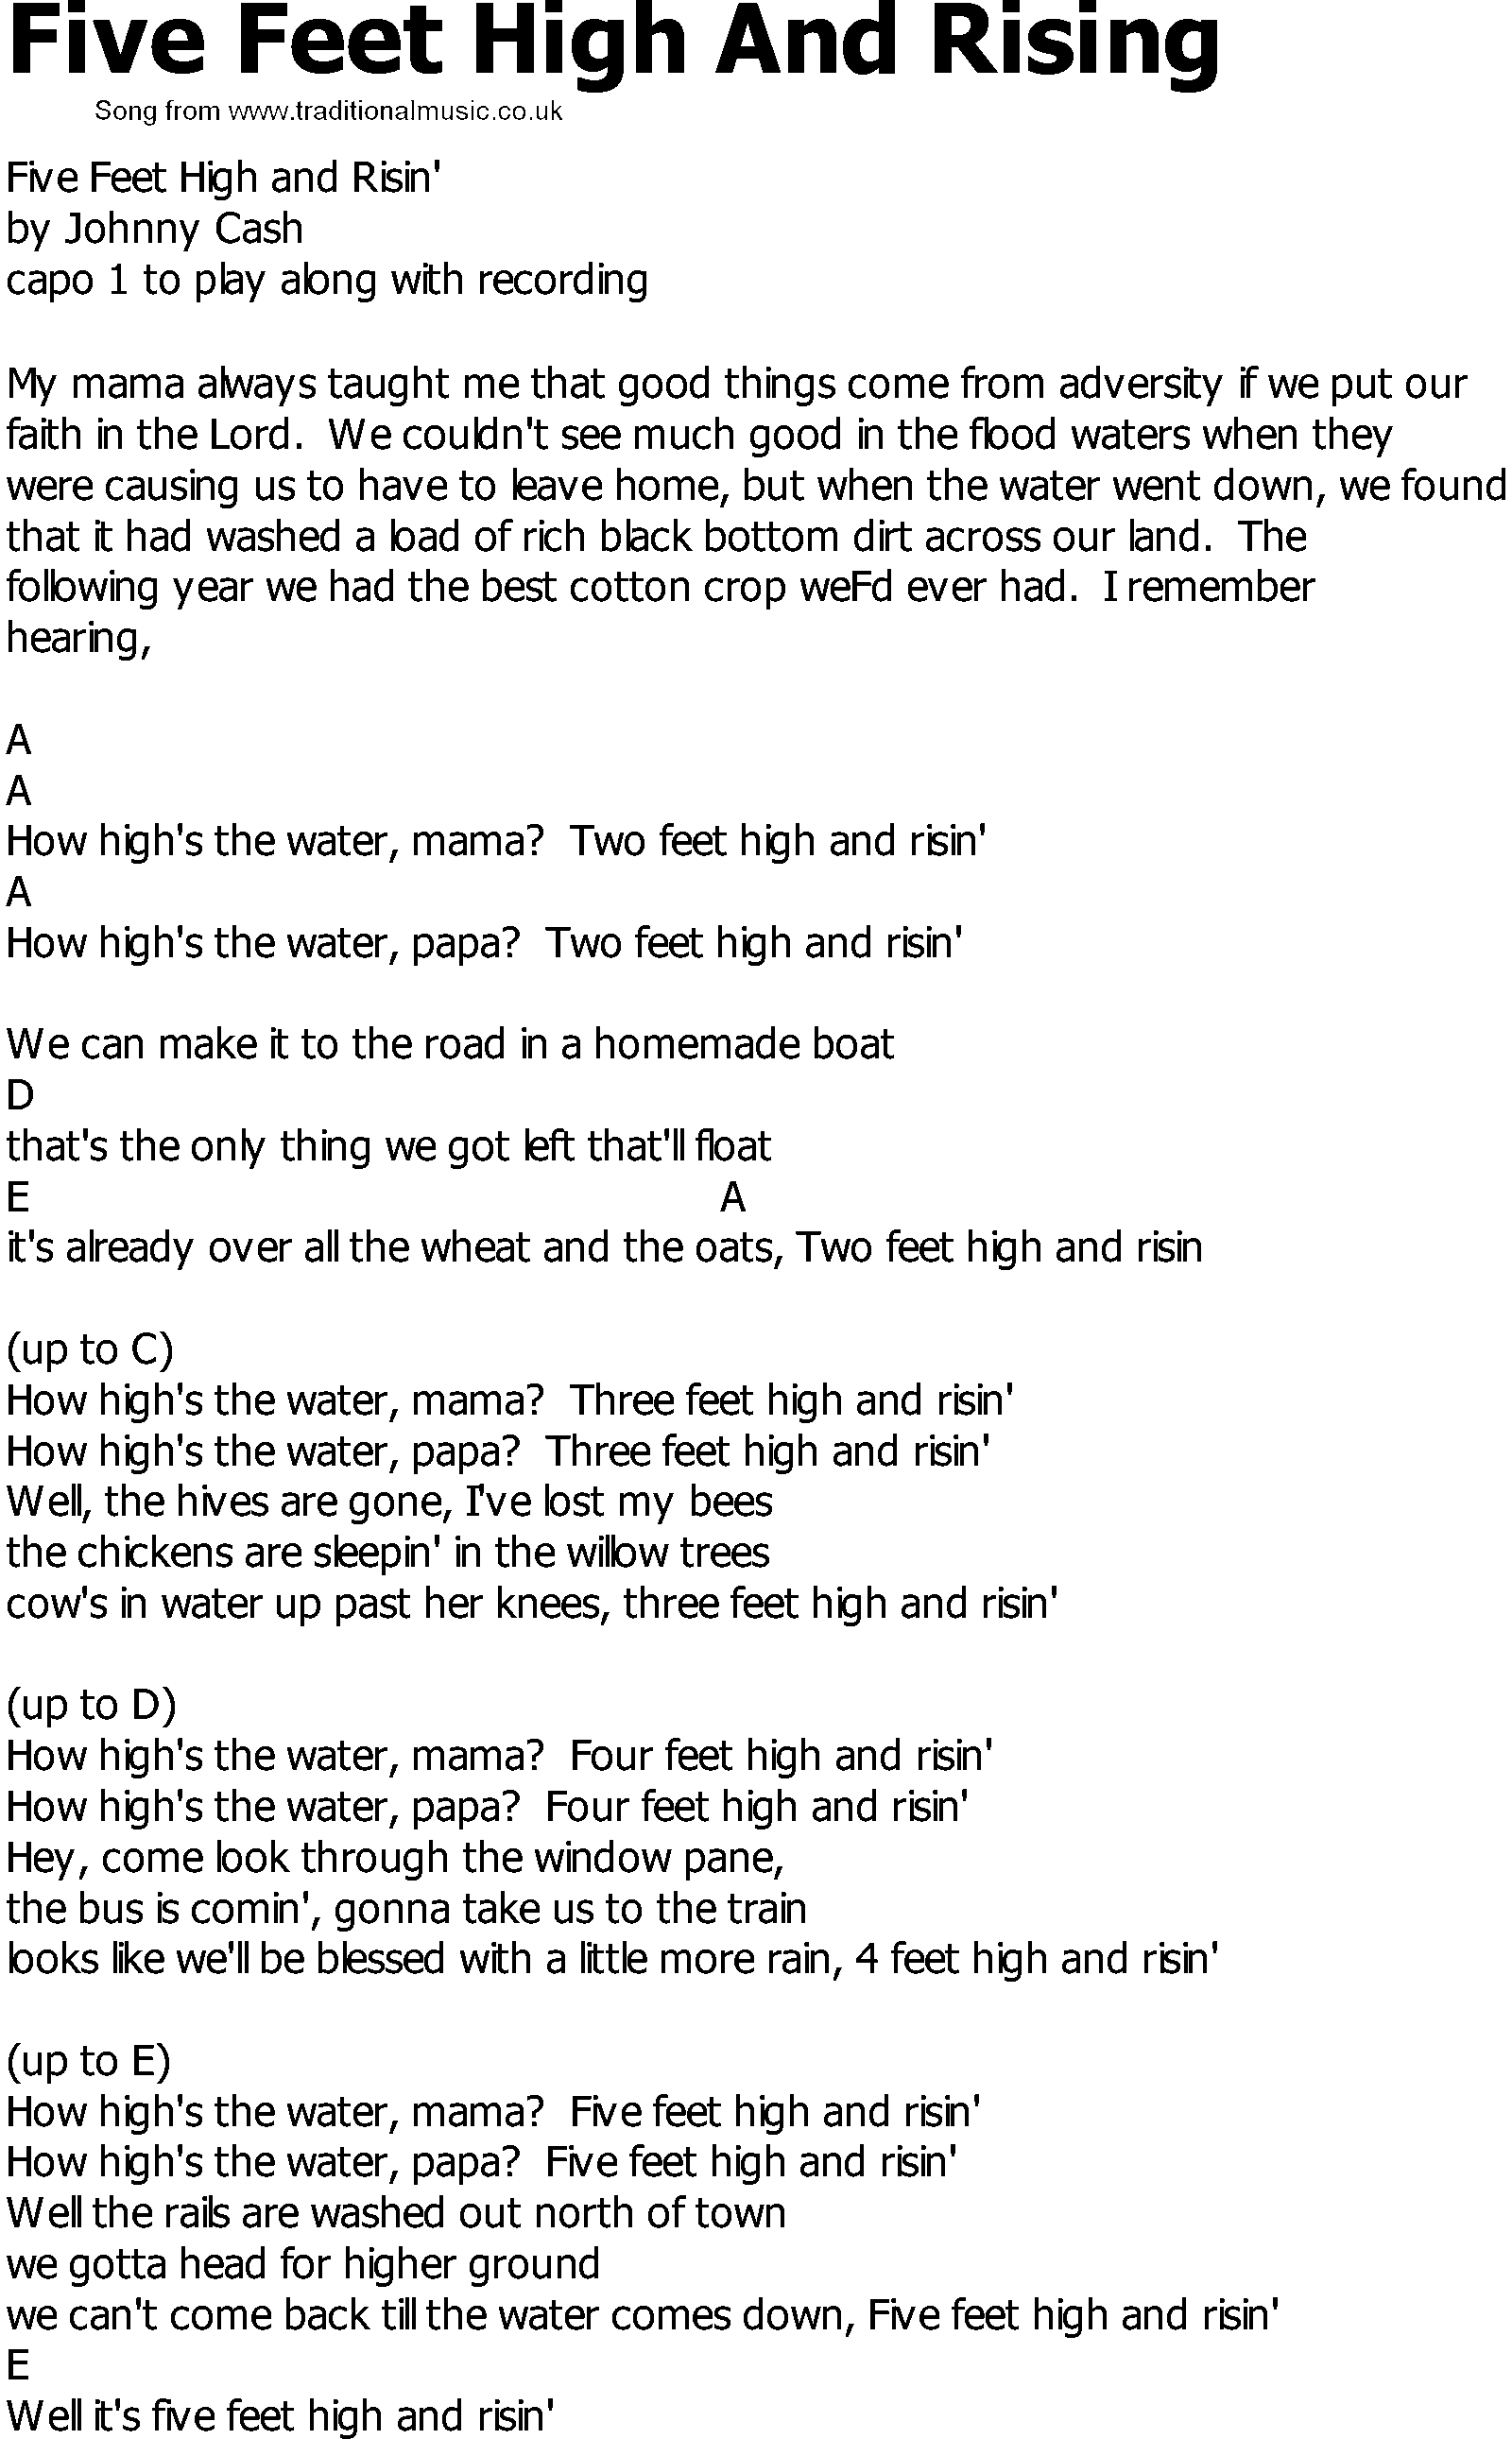 Old Country song lyrics with chords - Five Feet High And Rising